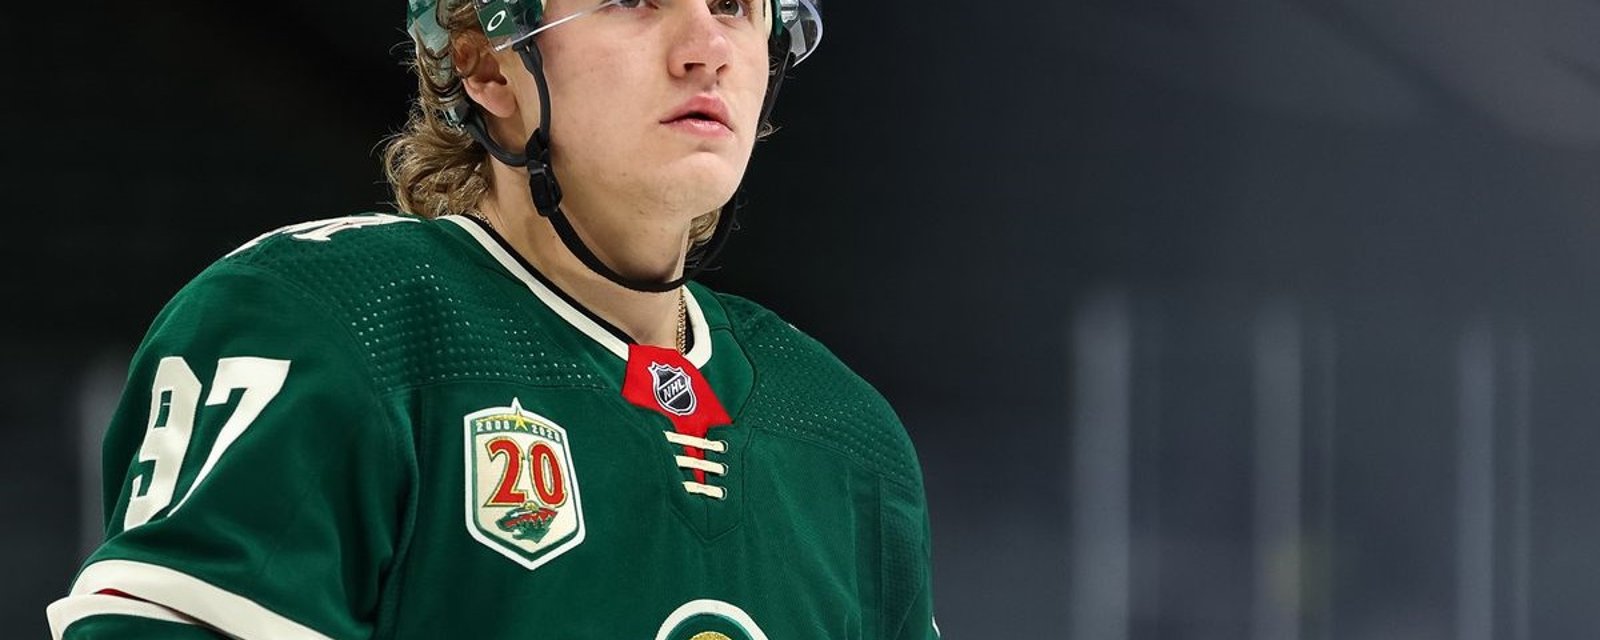 Rumor: Kaprizov has rejected two major offers from the Wild.